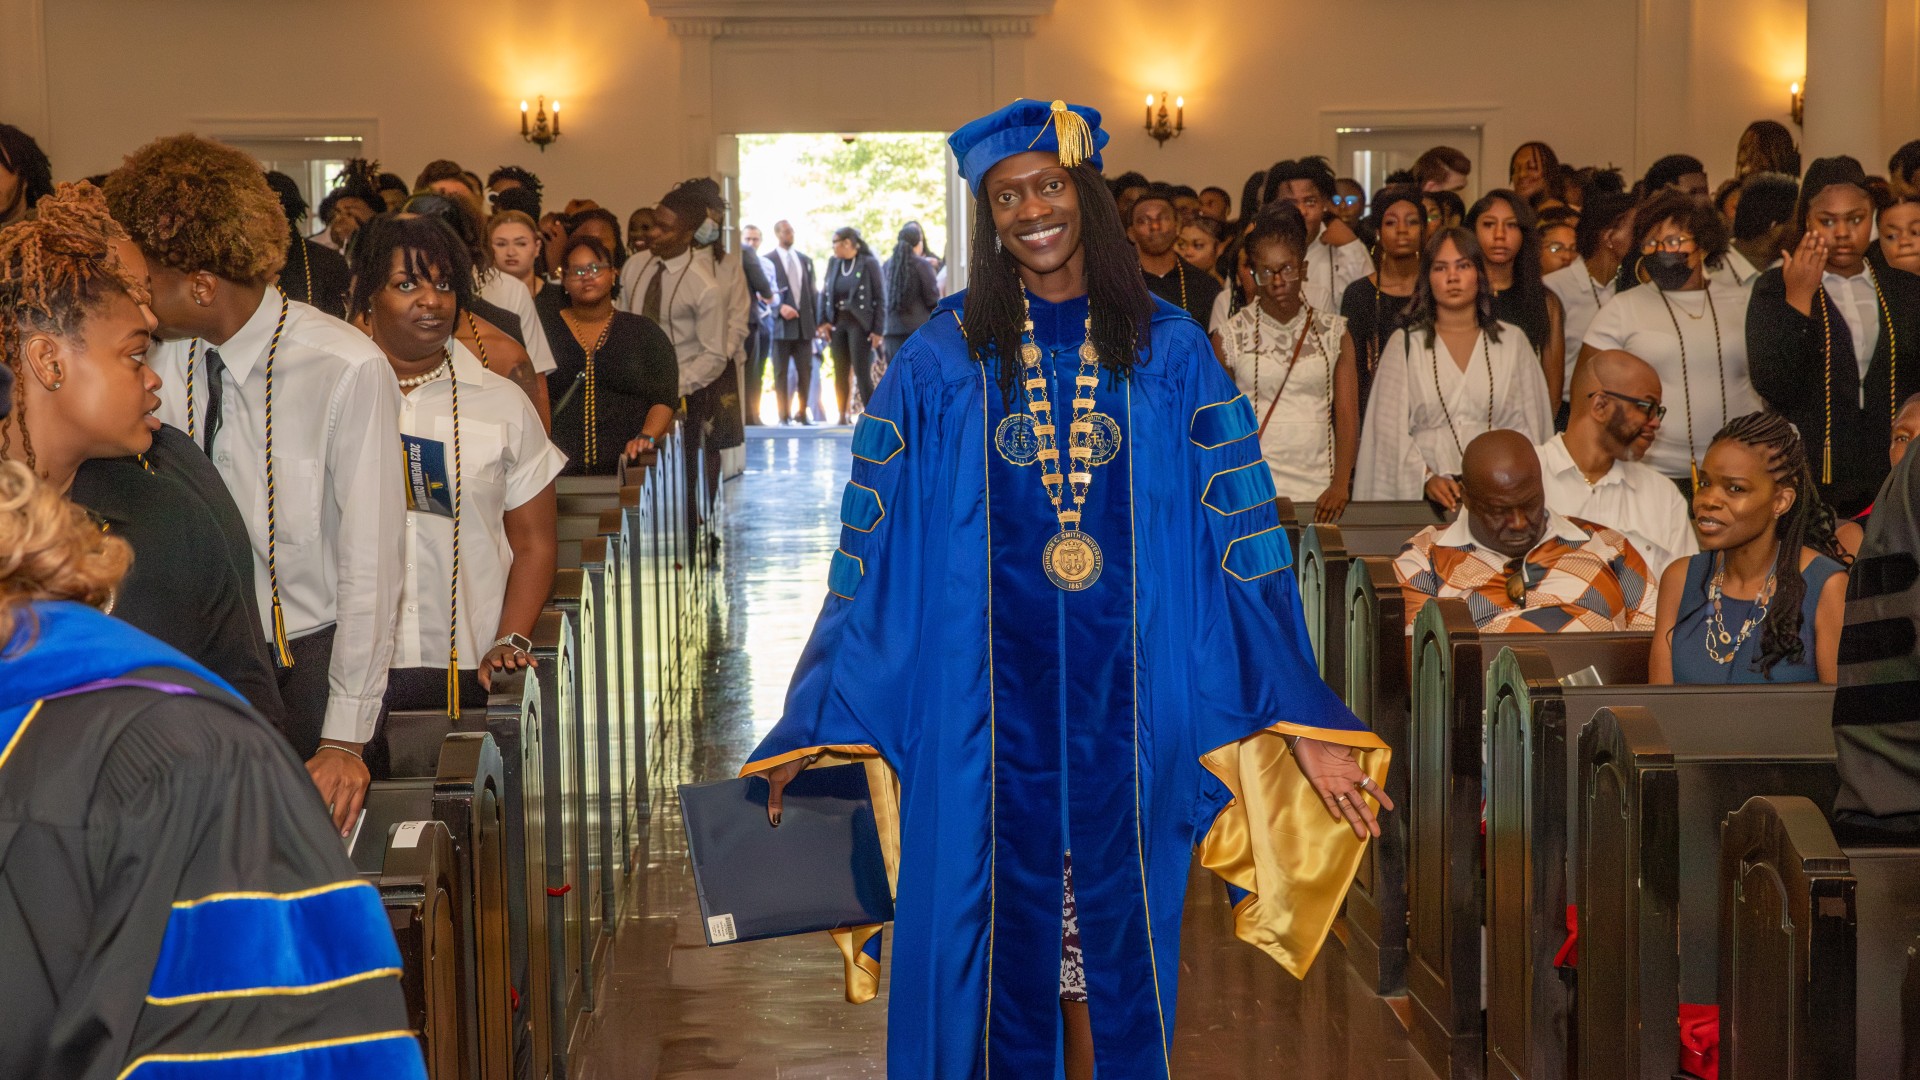 Dr. Valerie Kinloch, 15th president of Johnson C. Smith University and Convocation Speaker, enters the church during the processional